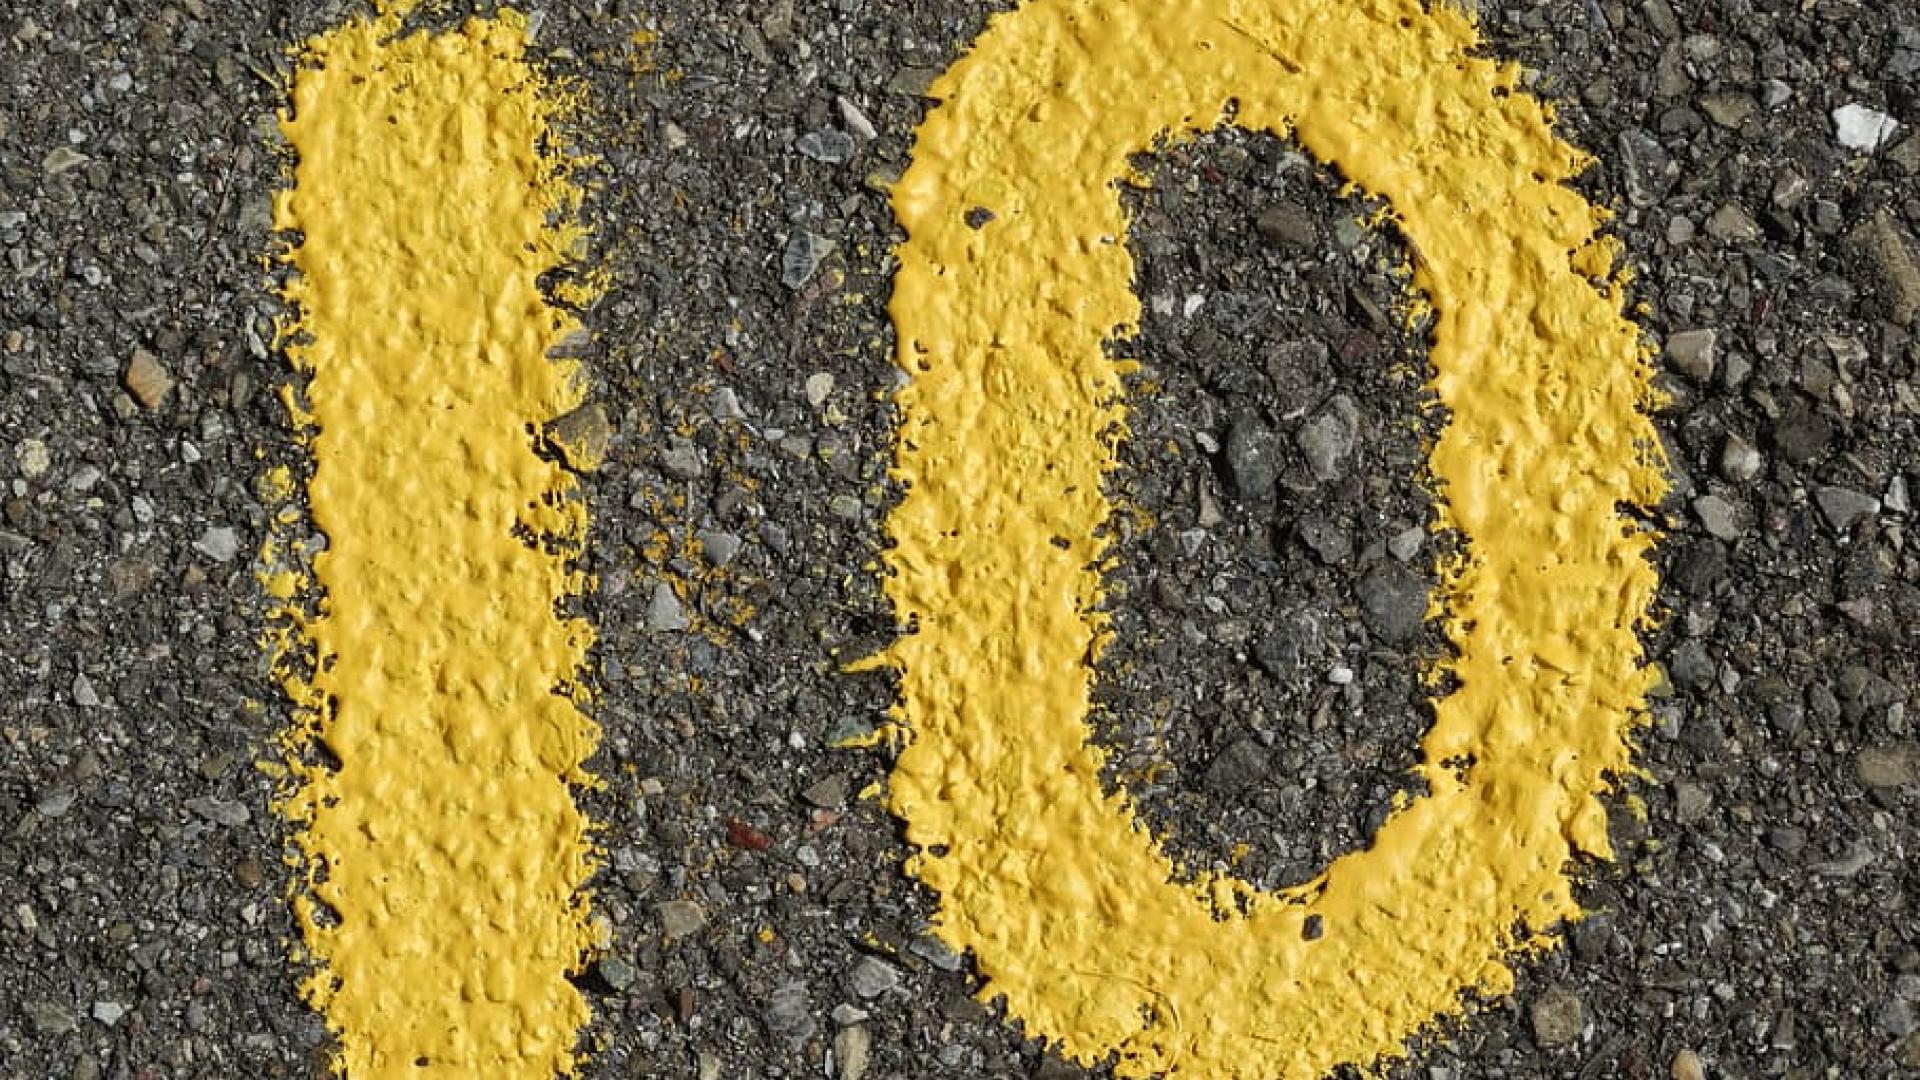 Number 10 drawn with yellow paint on gravel road 